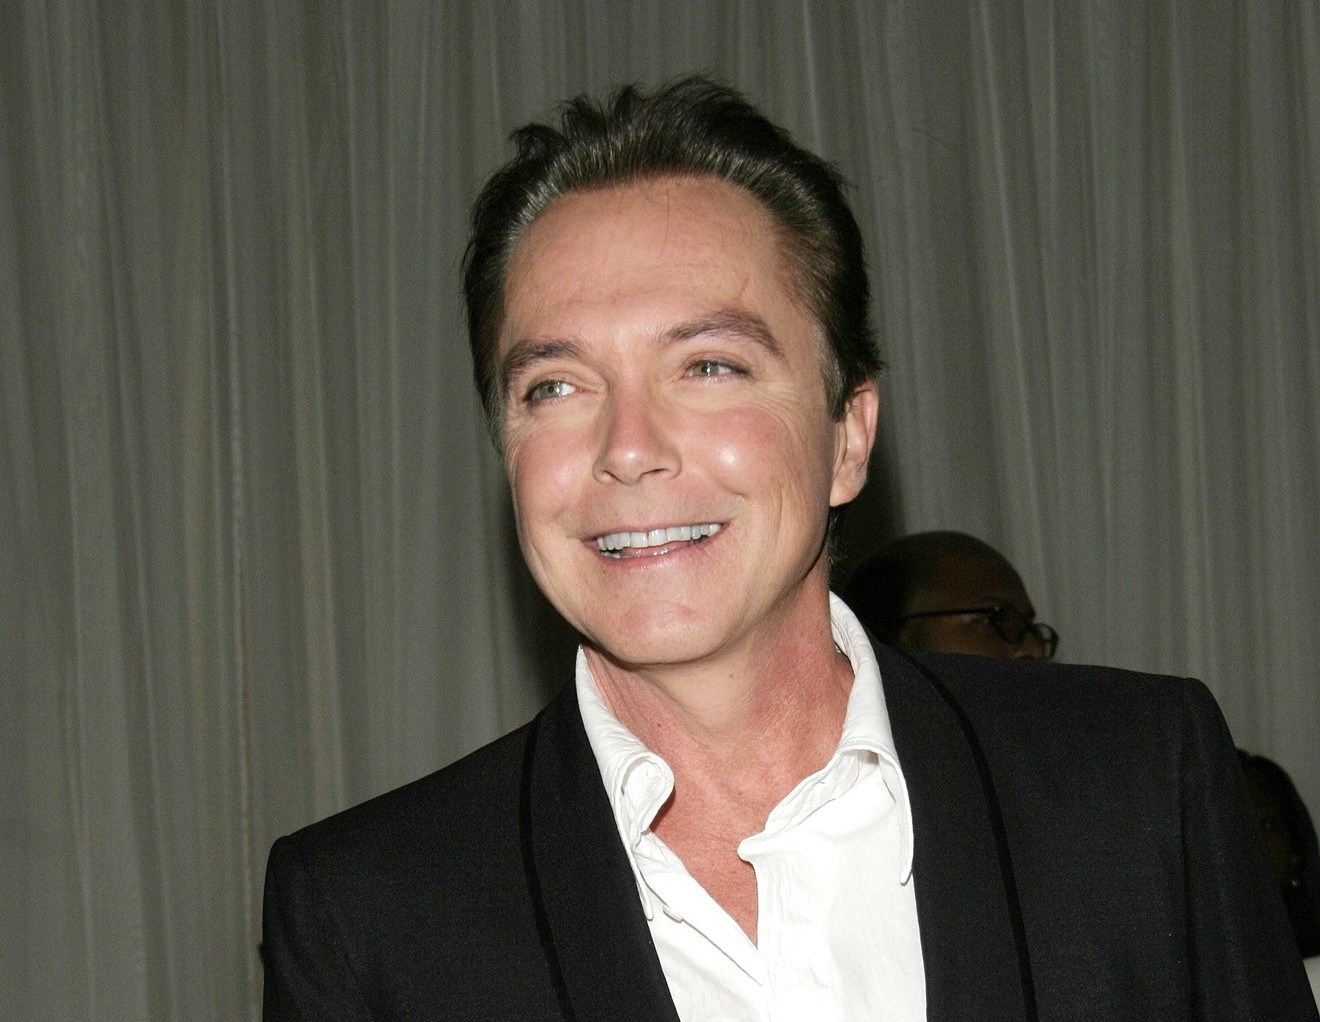 Robrt L. Pela and Ann Moses on the life and legacy of David Cassidy.